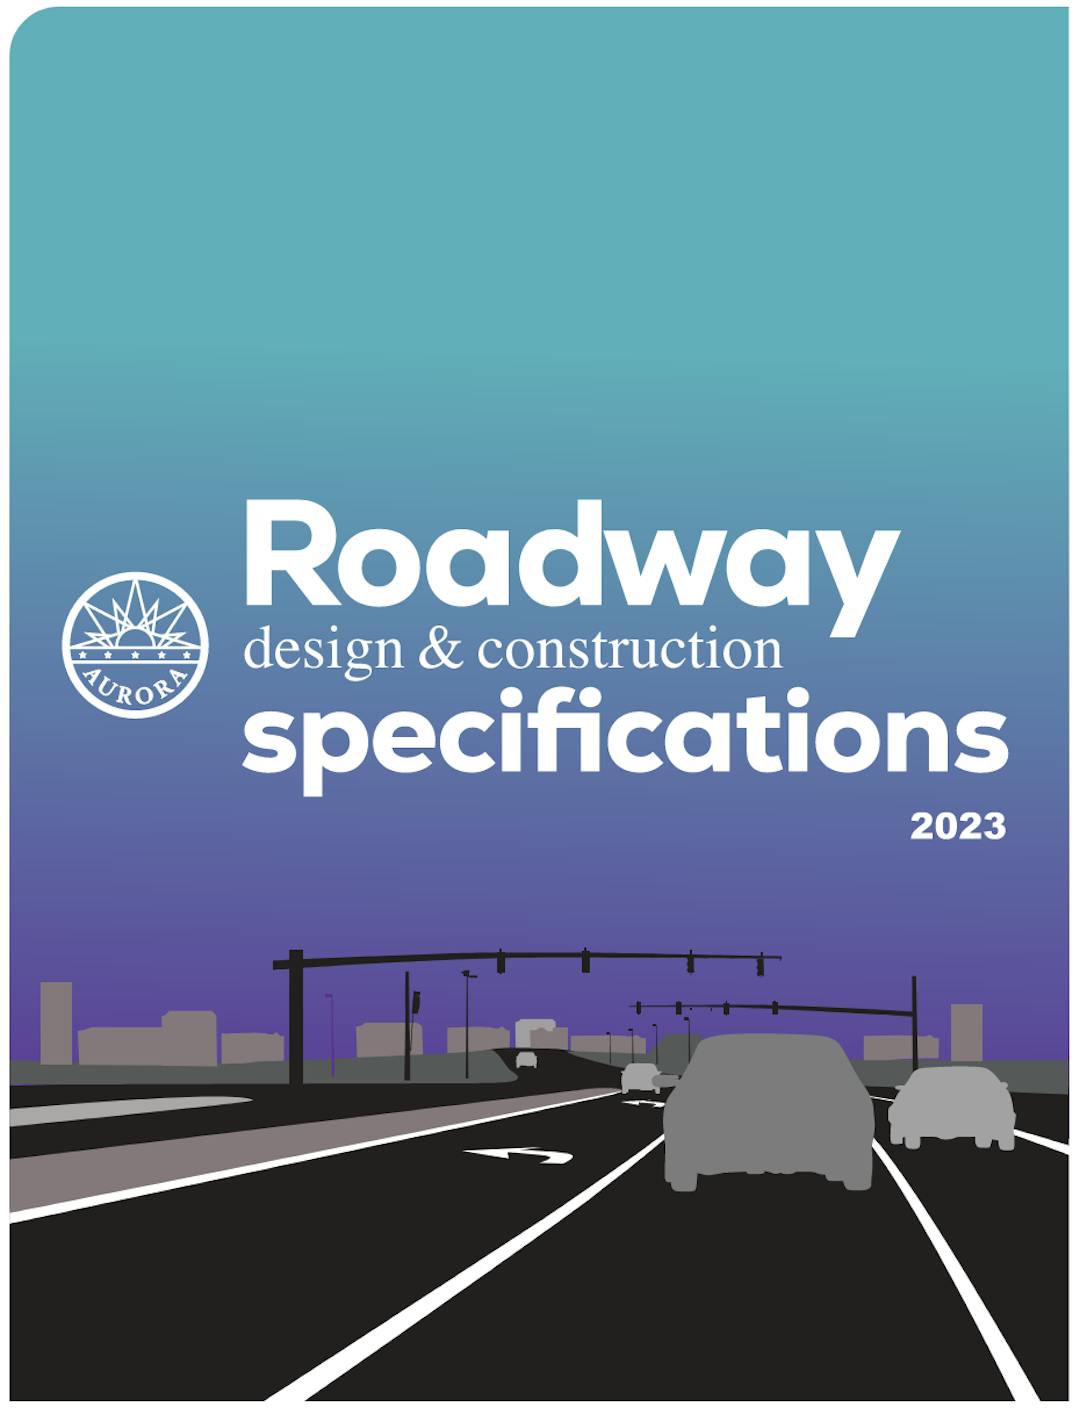 Image of cover of roadway manual with silhouettes of cars, traffic signals and a road